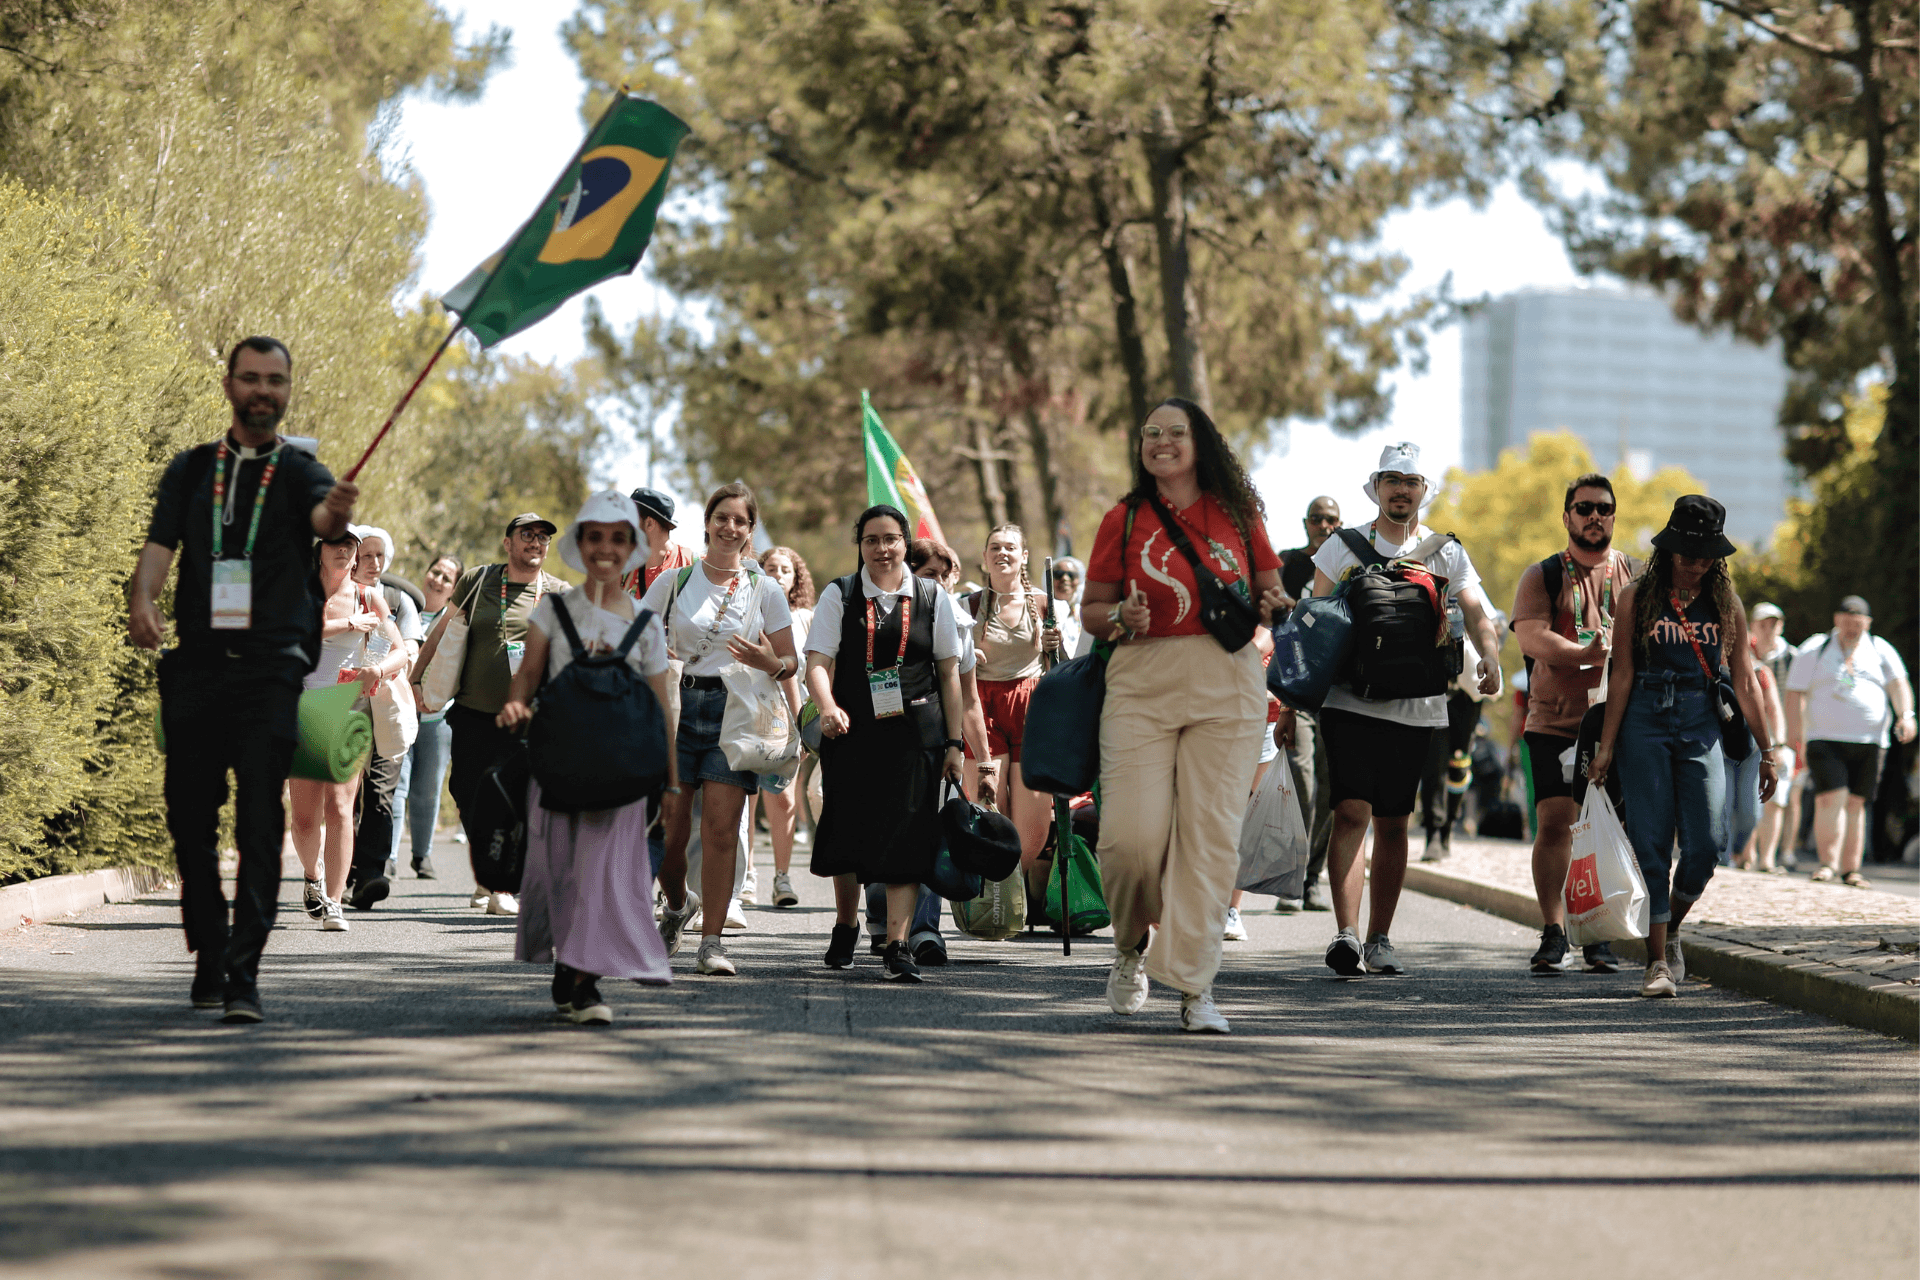 Featured image from the article: What motivates young people to pilgrimage to Campo da Graça?